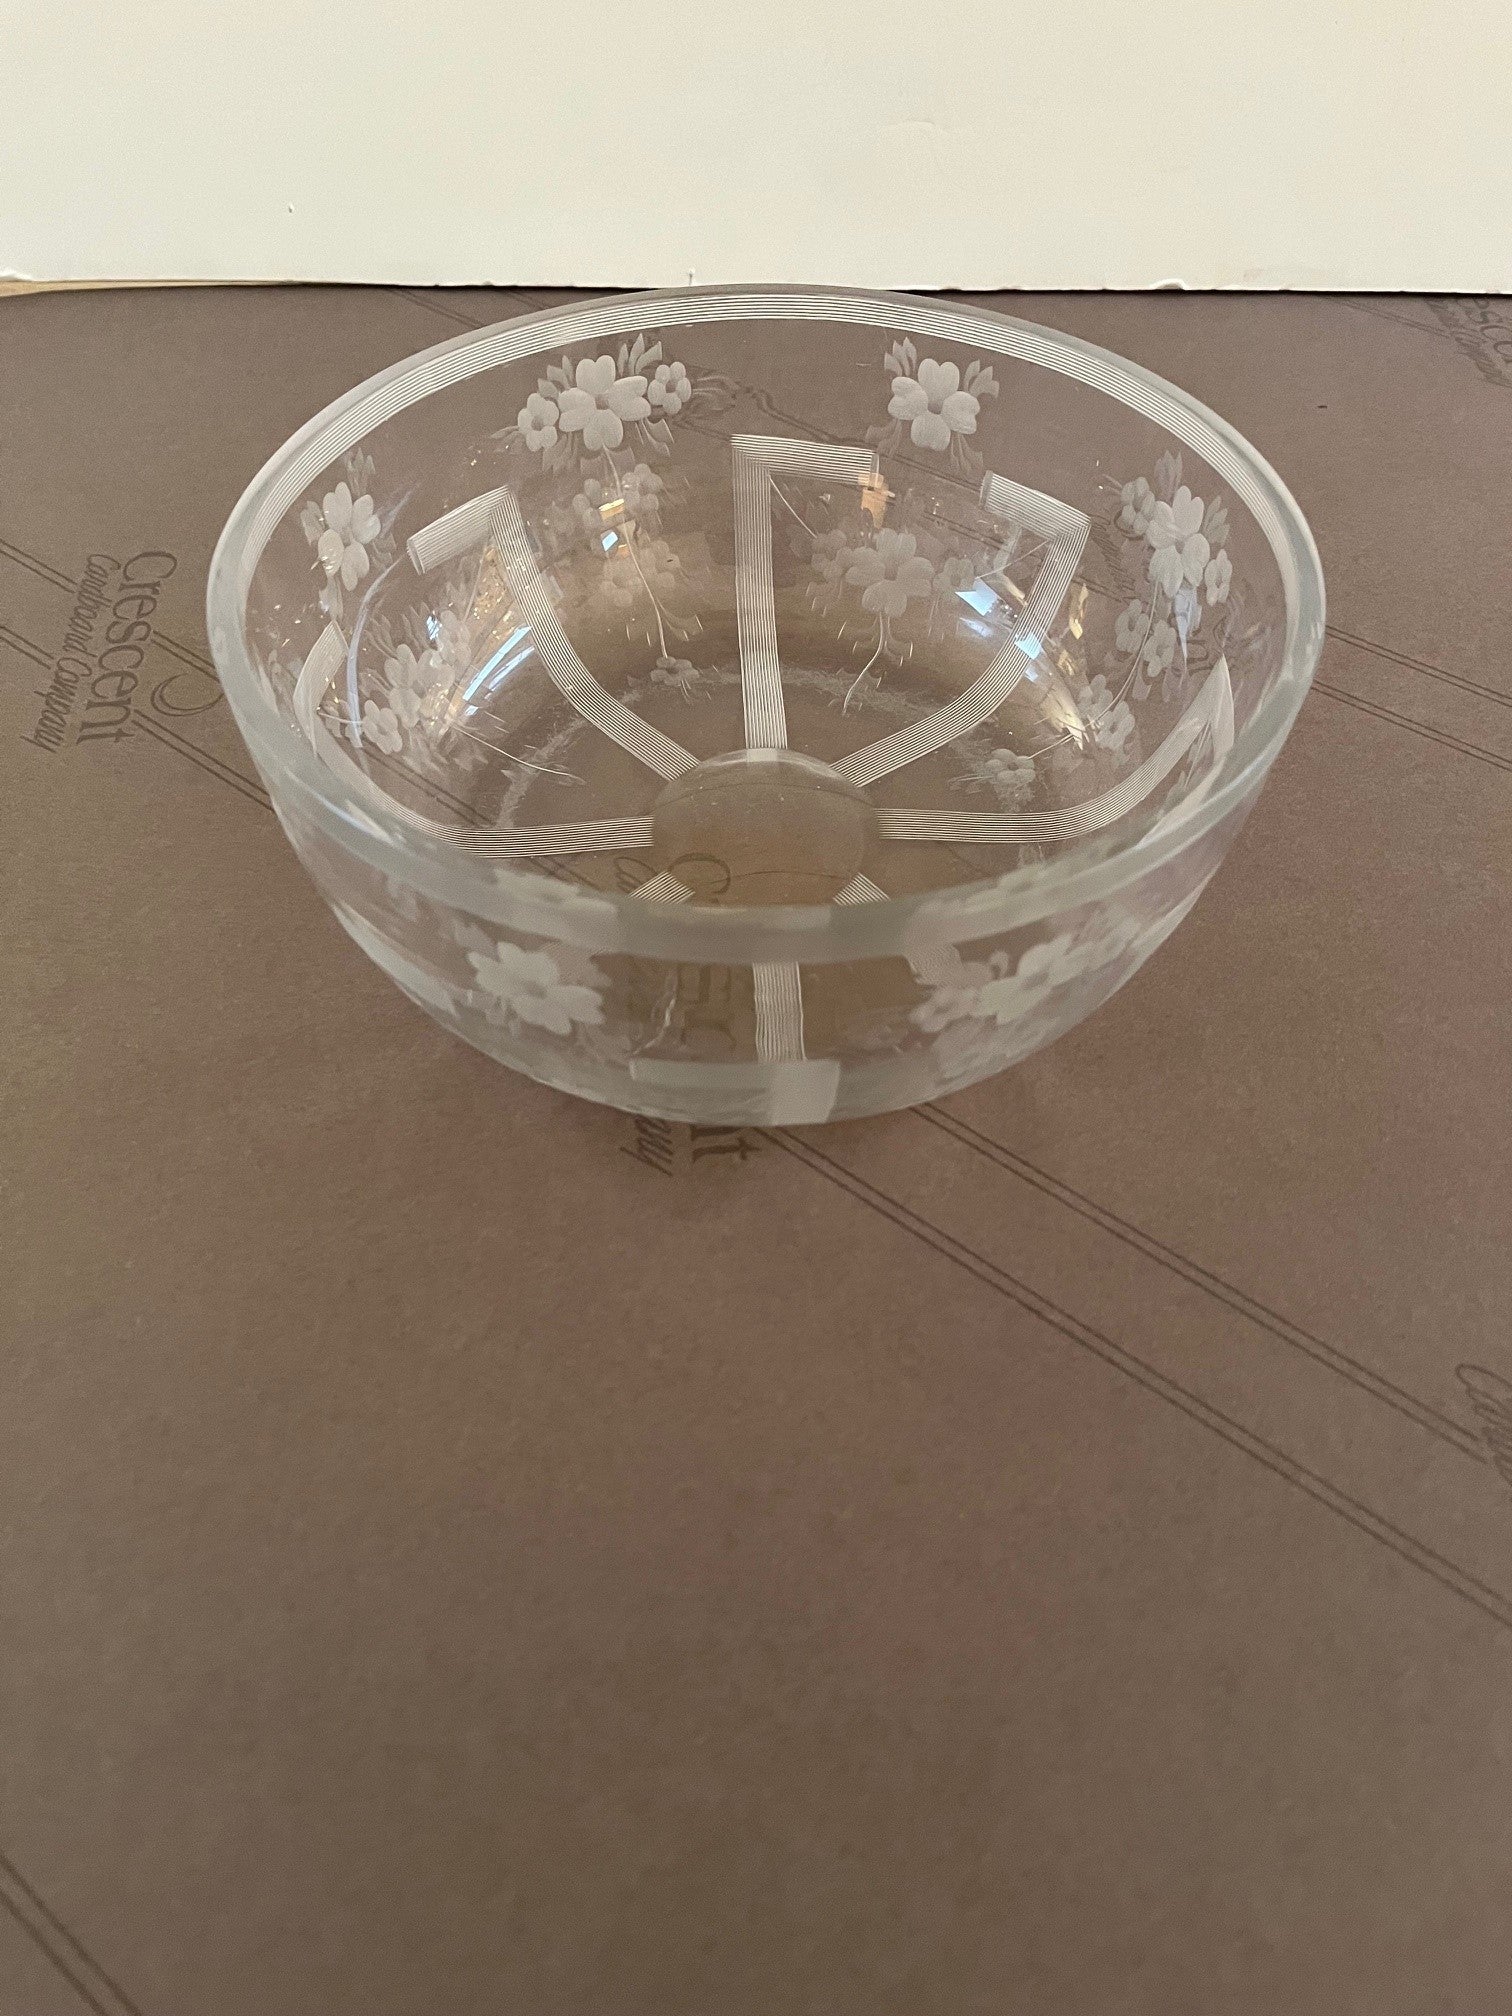 Vintage Rare Etched Floral Decorated Cut Glass Bowl by T. G. Hawkes & co